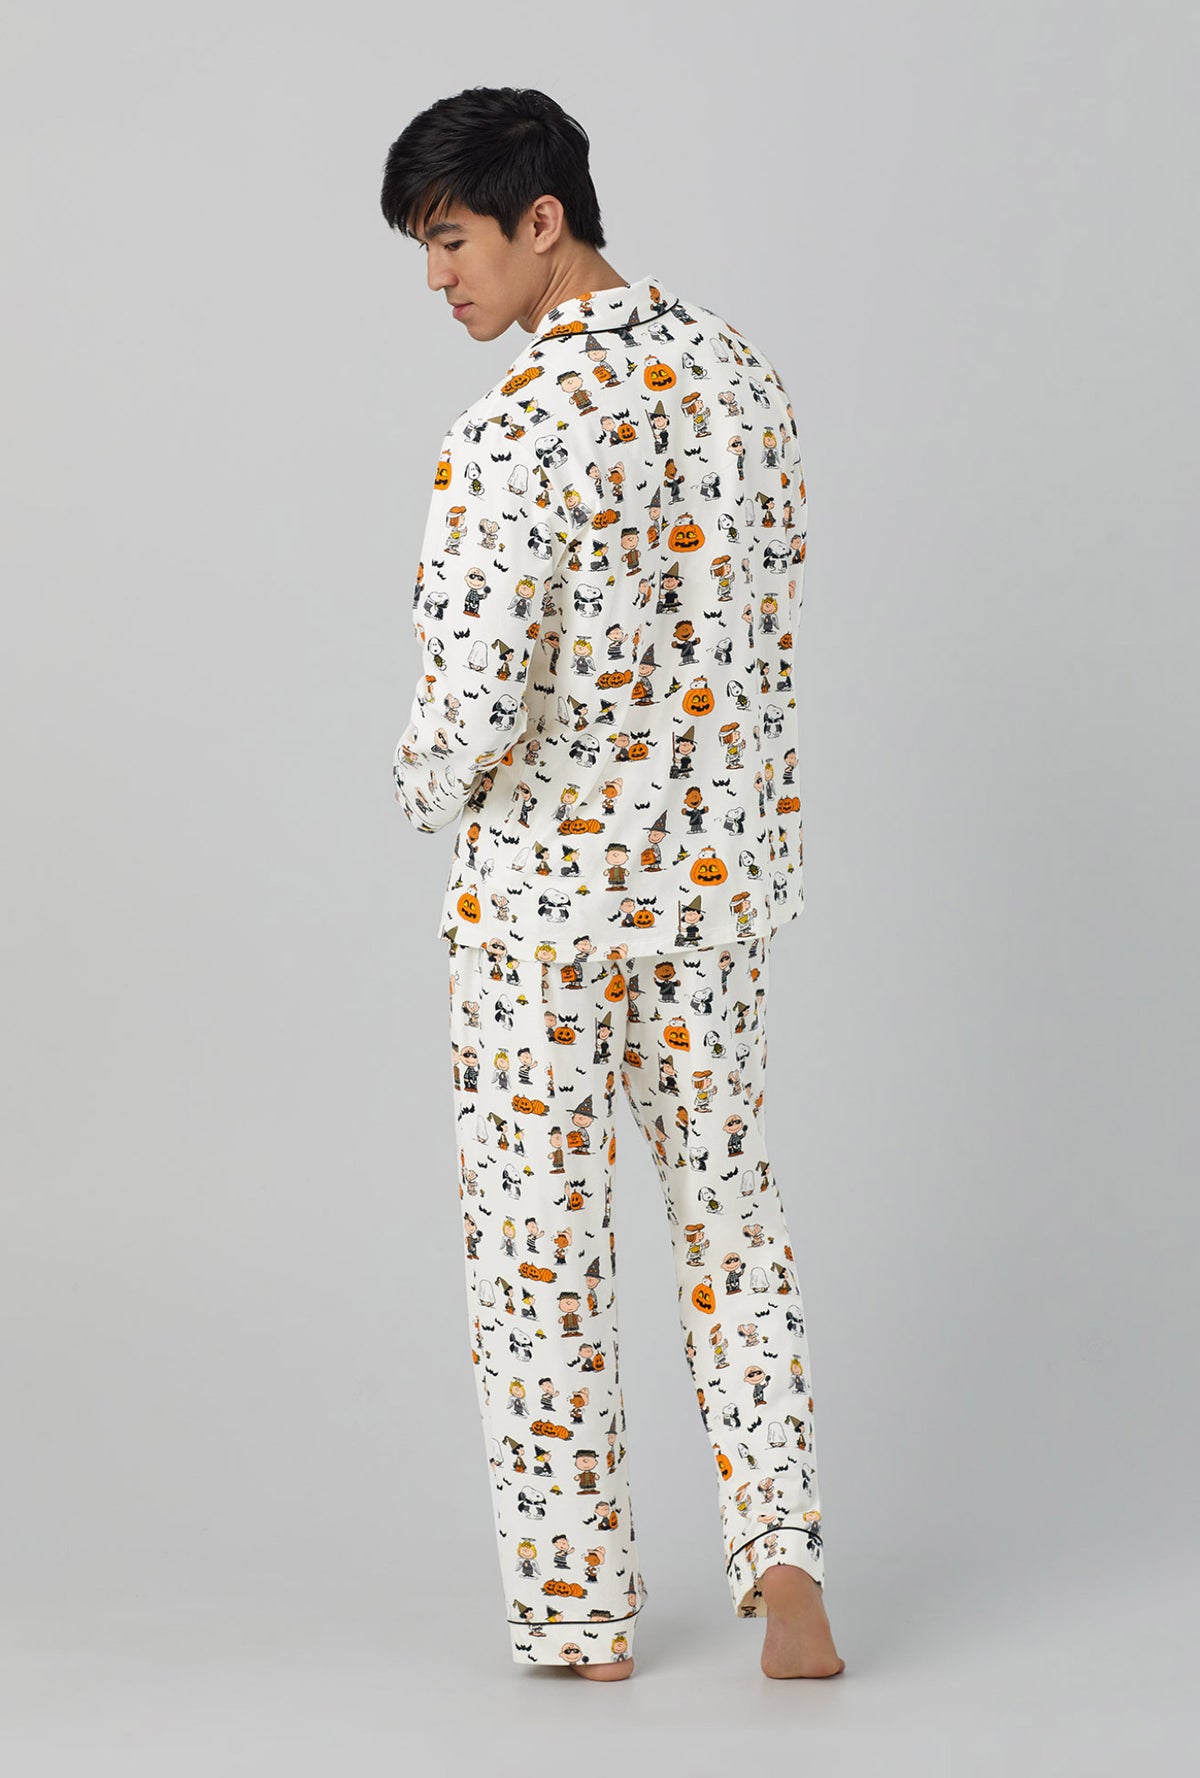 A man wearing white long sleeve classic stretch jersey pj set with snoopys halloween print